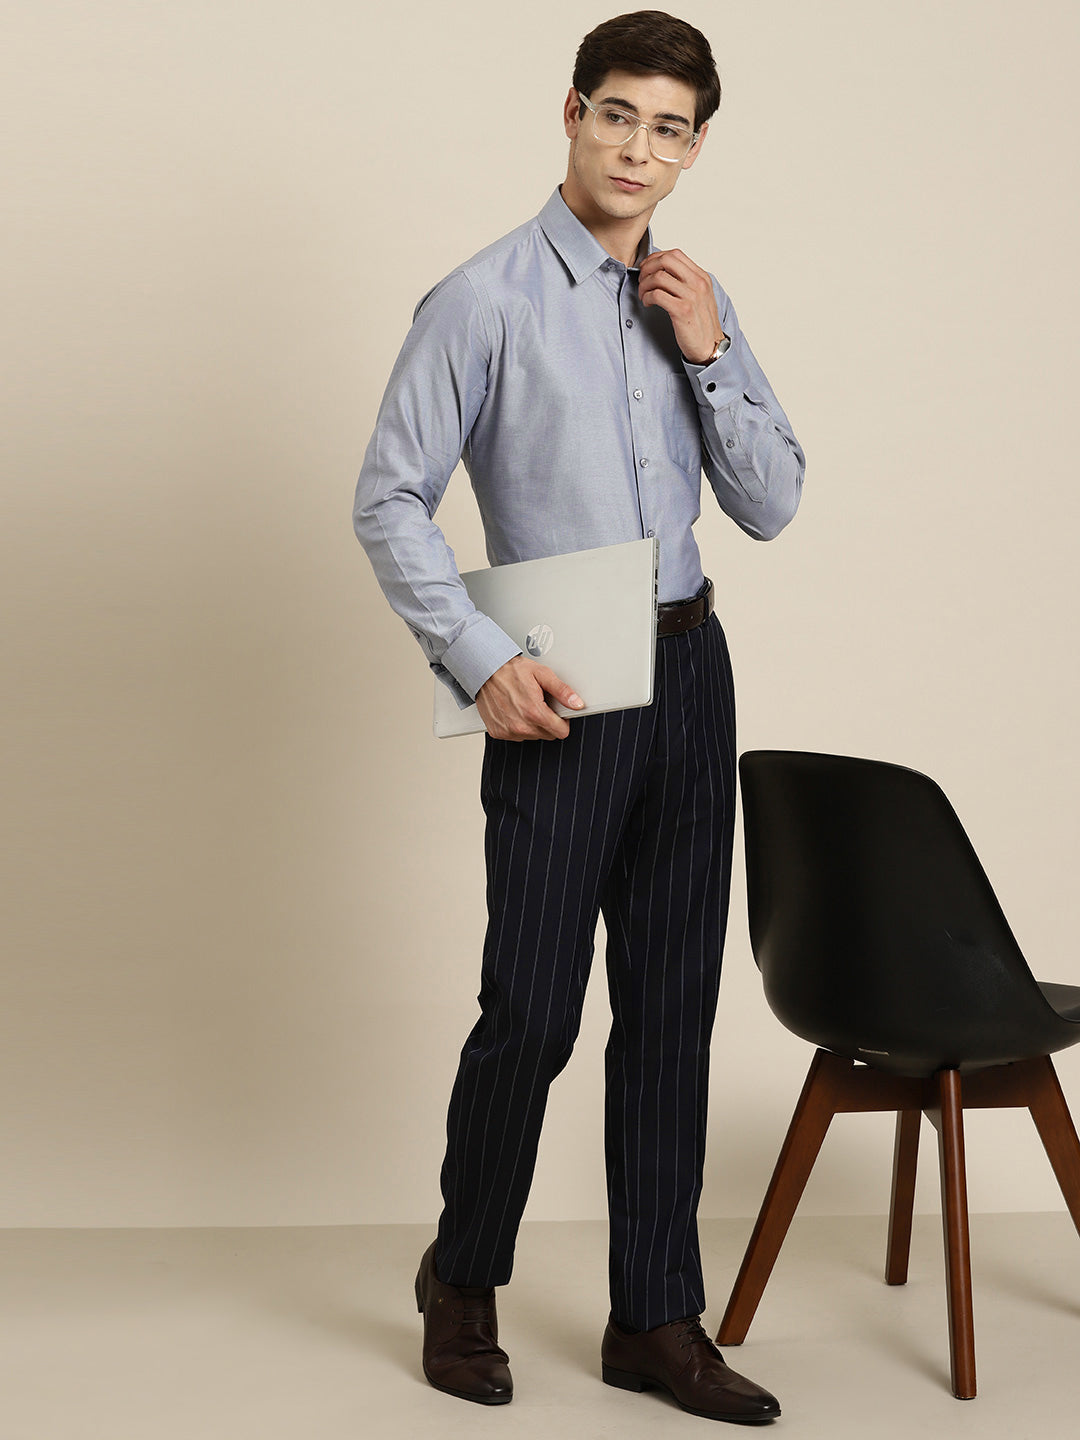 What color shirt should I wear with blue trousers and a gray sweater? -  Quora